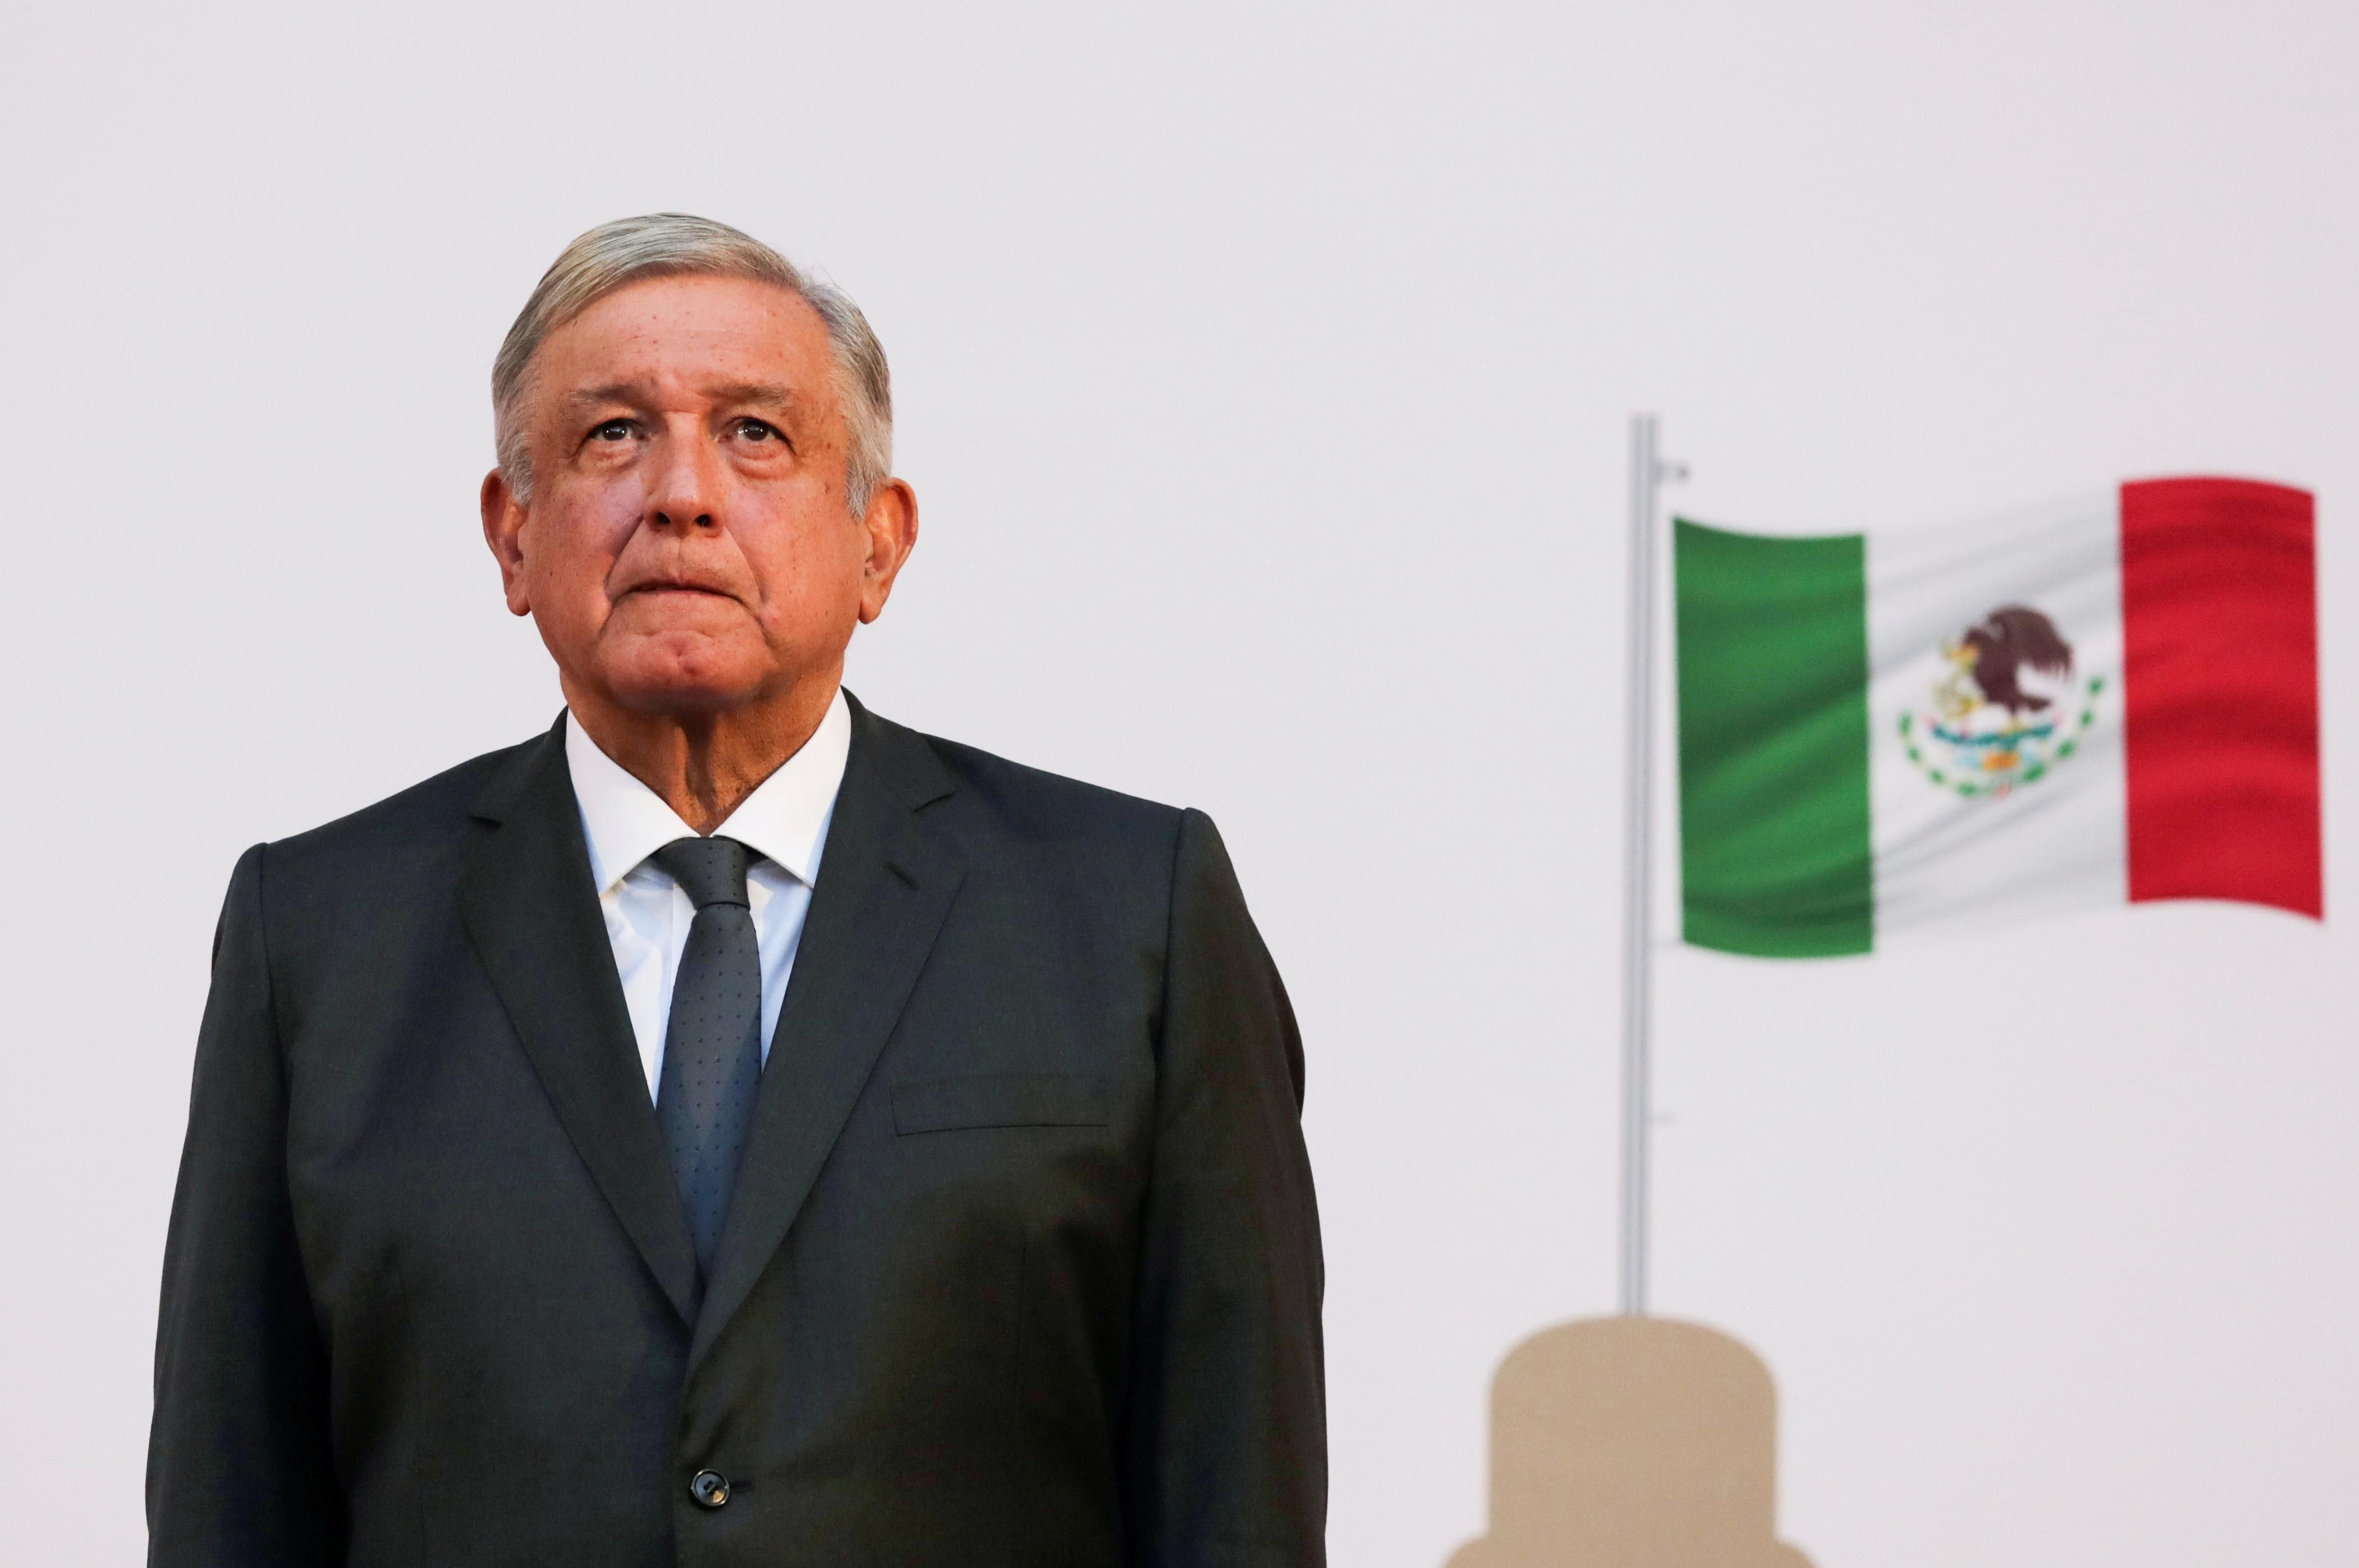 Mexico's president, Andres Manuel Lopez Obrador, listens to the national anthem after addressing the nation on his second anniversary as the President of Mexico, at the National Palace in Mexico City, Mexico, December 1, 2020.